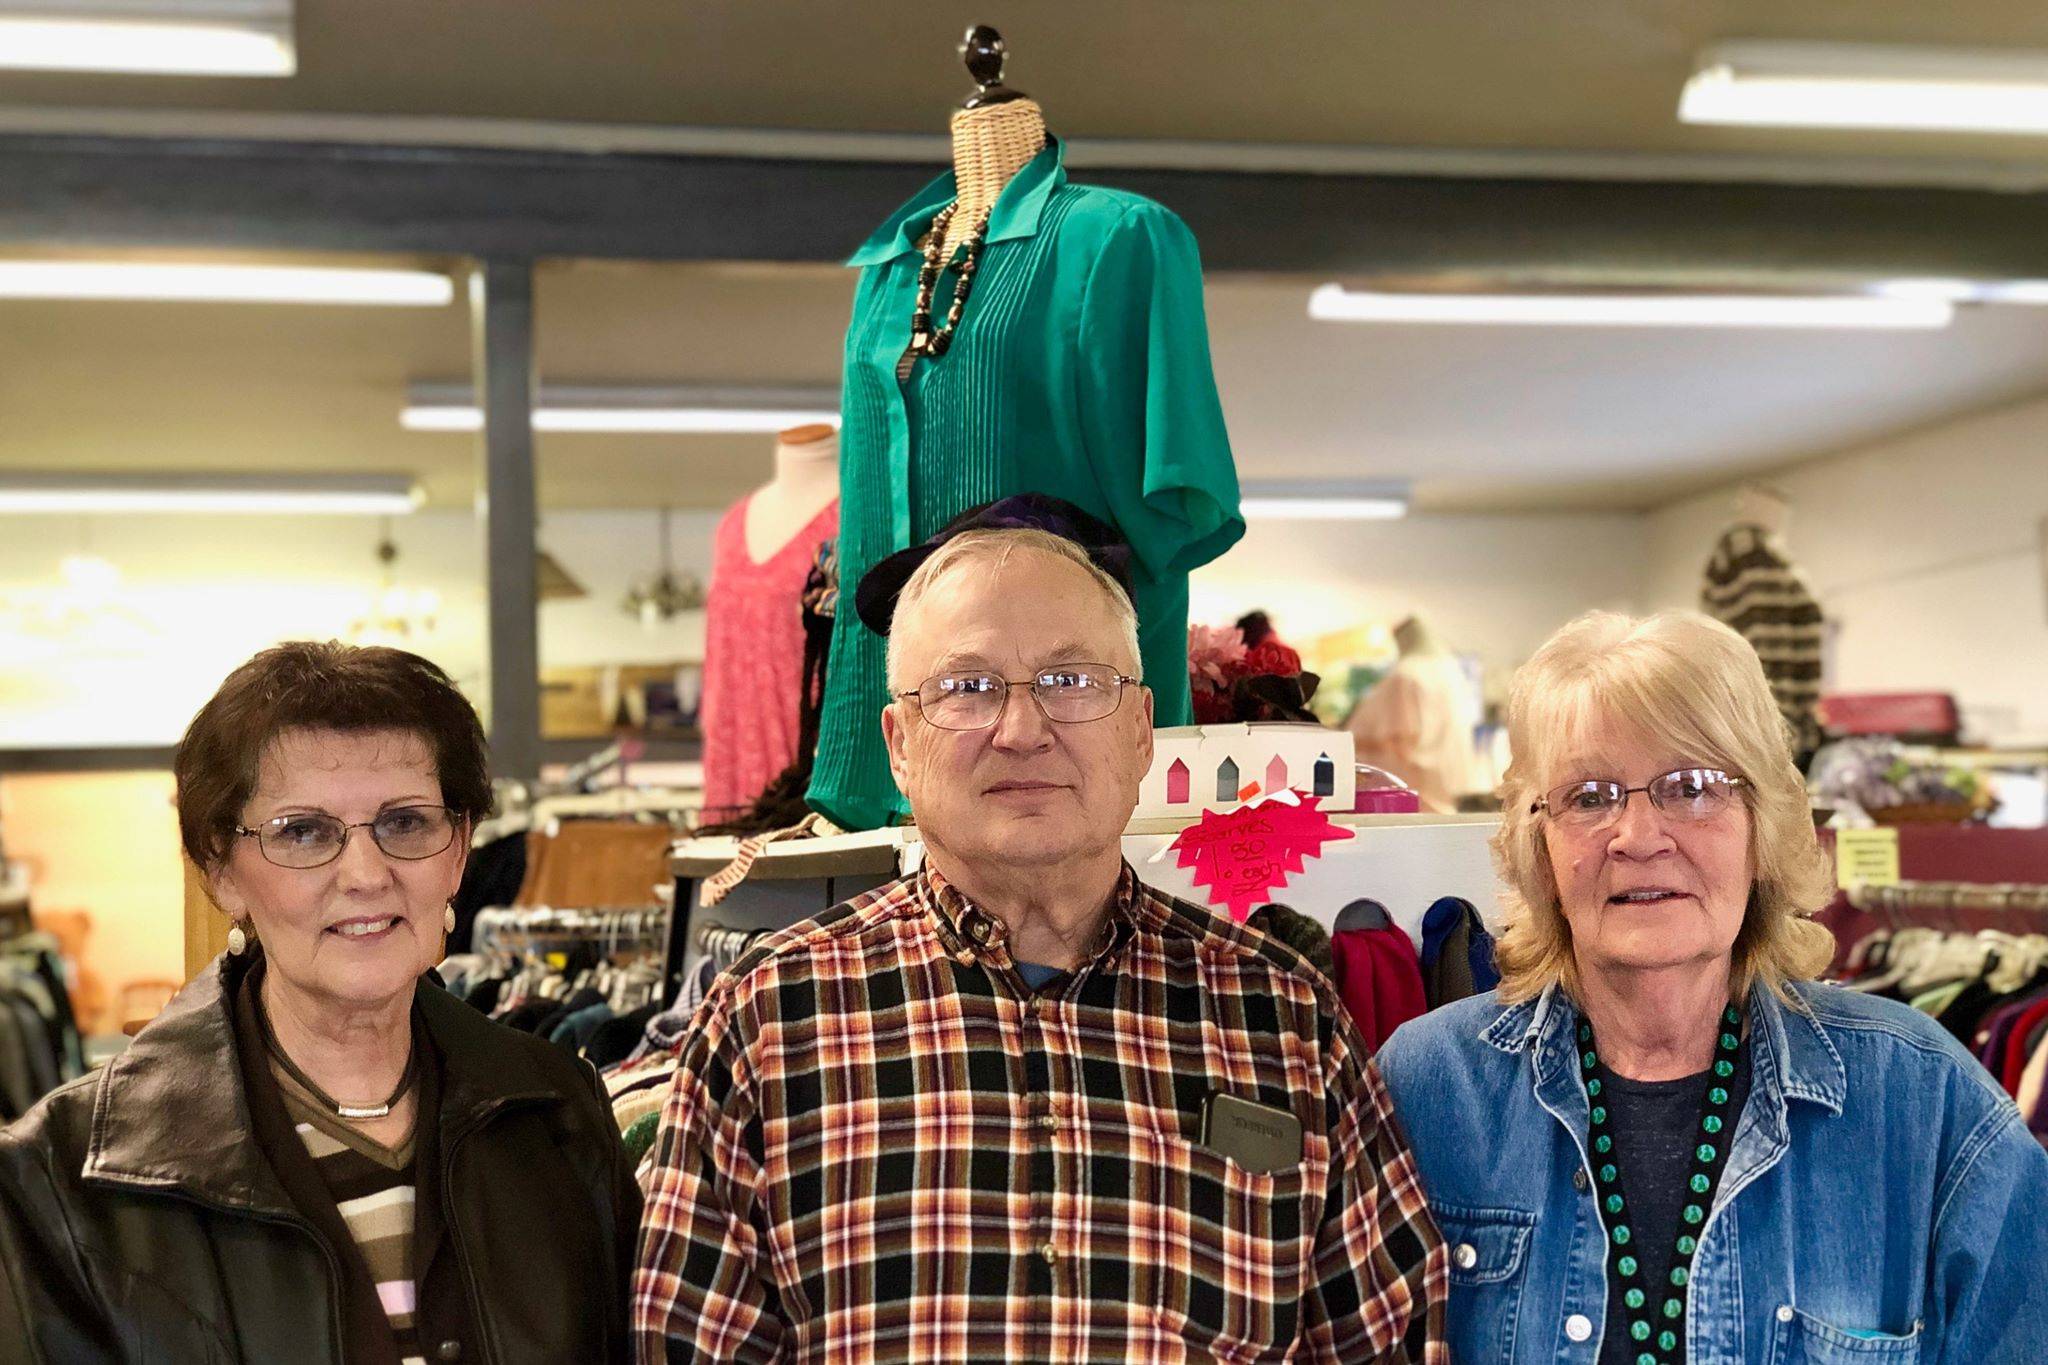 Jackie Swanson and Alex Zerbinos are board members for Bishop’s Attic in Soldotna, Alaska where Jean Warrick is a manager on Friday, Feb. 1, 2019. The thrift shop has seen an increase in donations and uses the items to give back to the community. (Photo by Victoria Petersen/Peninsula Clarion)